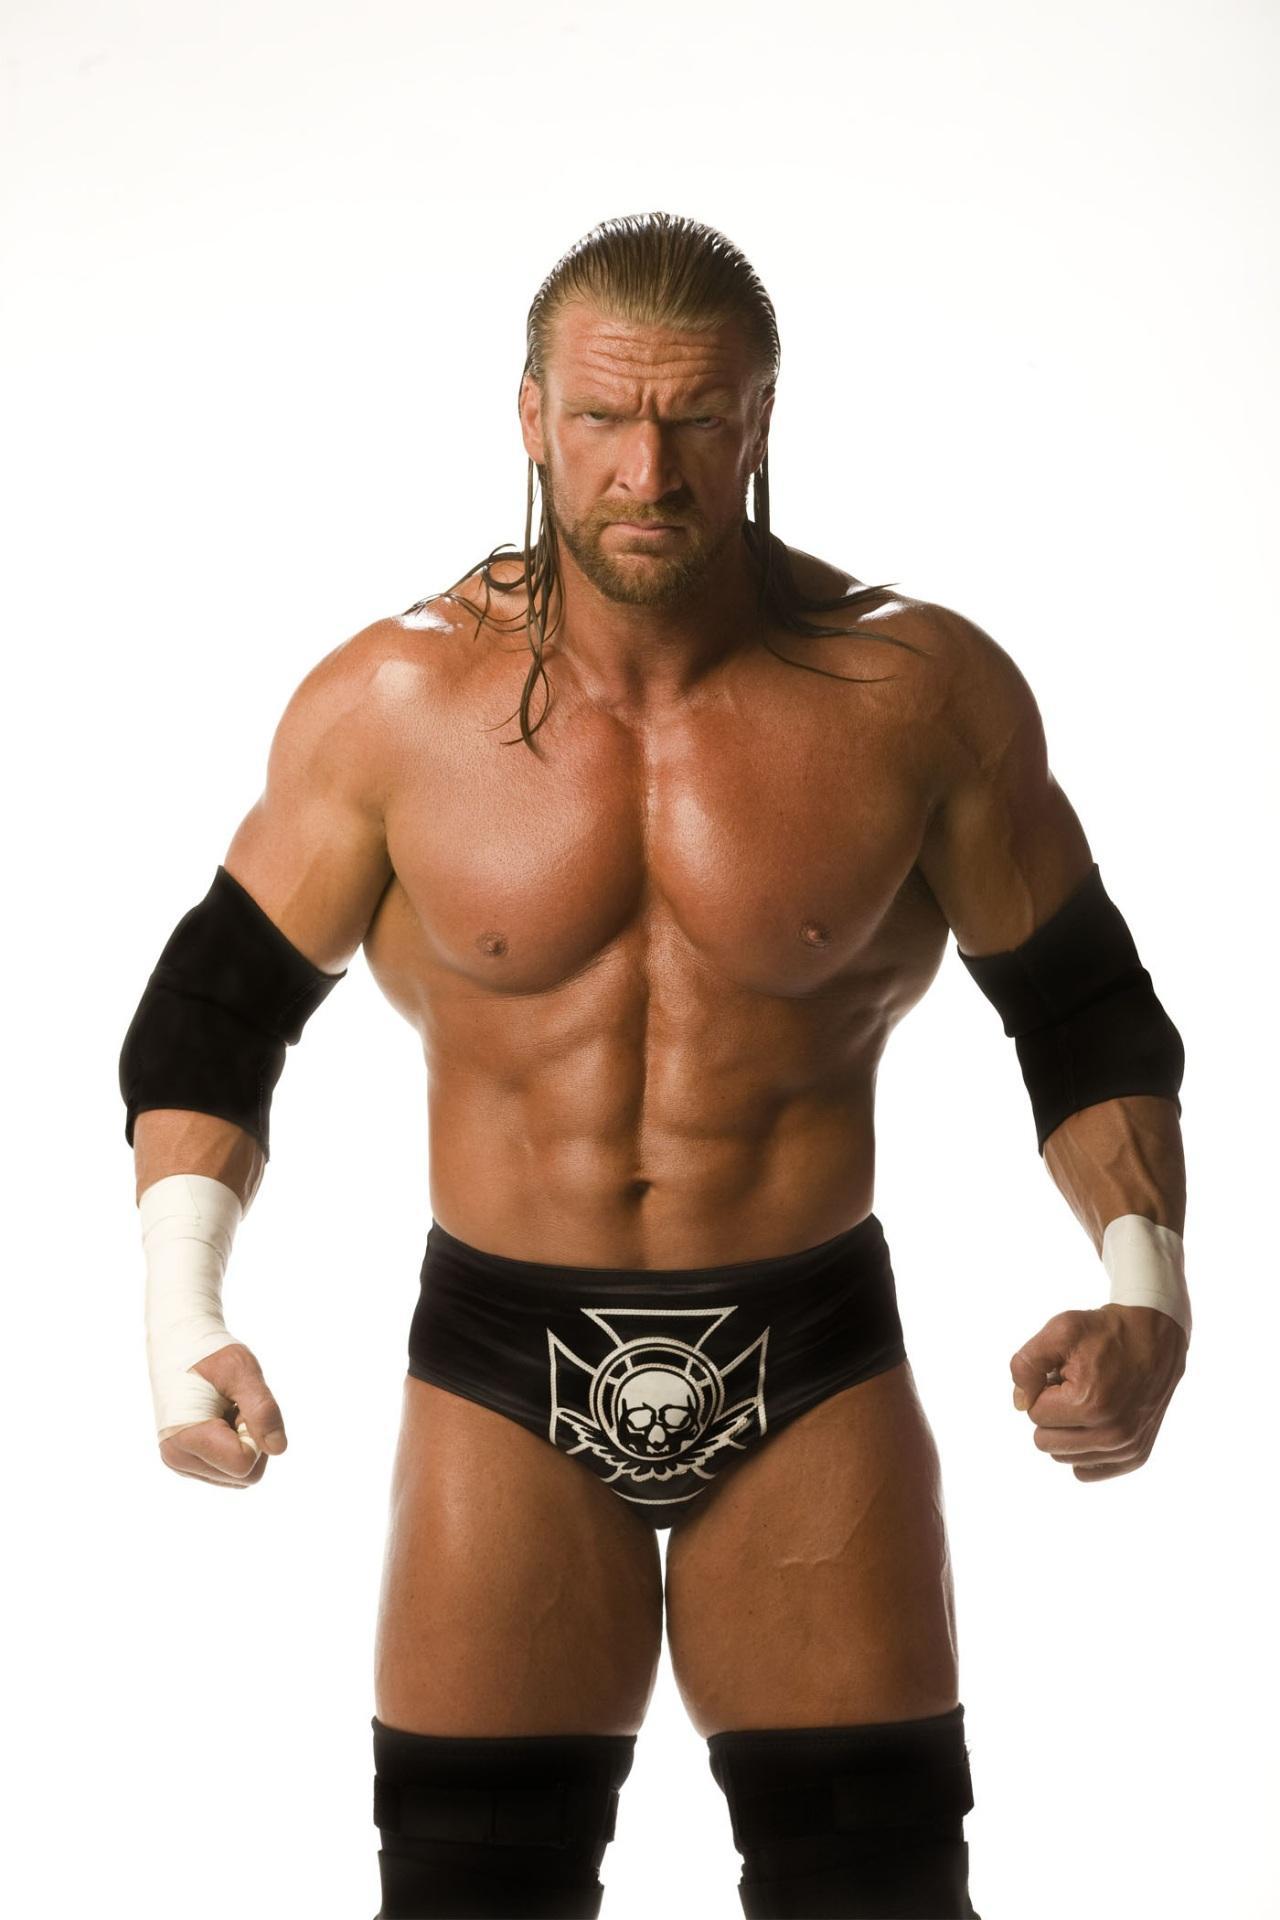 Triple H Photoset&hellip;.I&rsquo;d say this is Best For Business! 